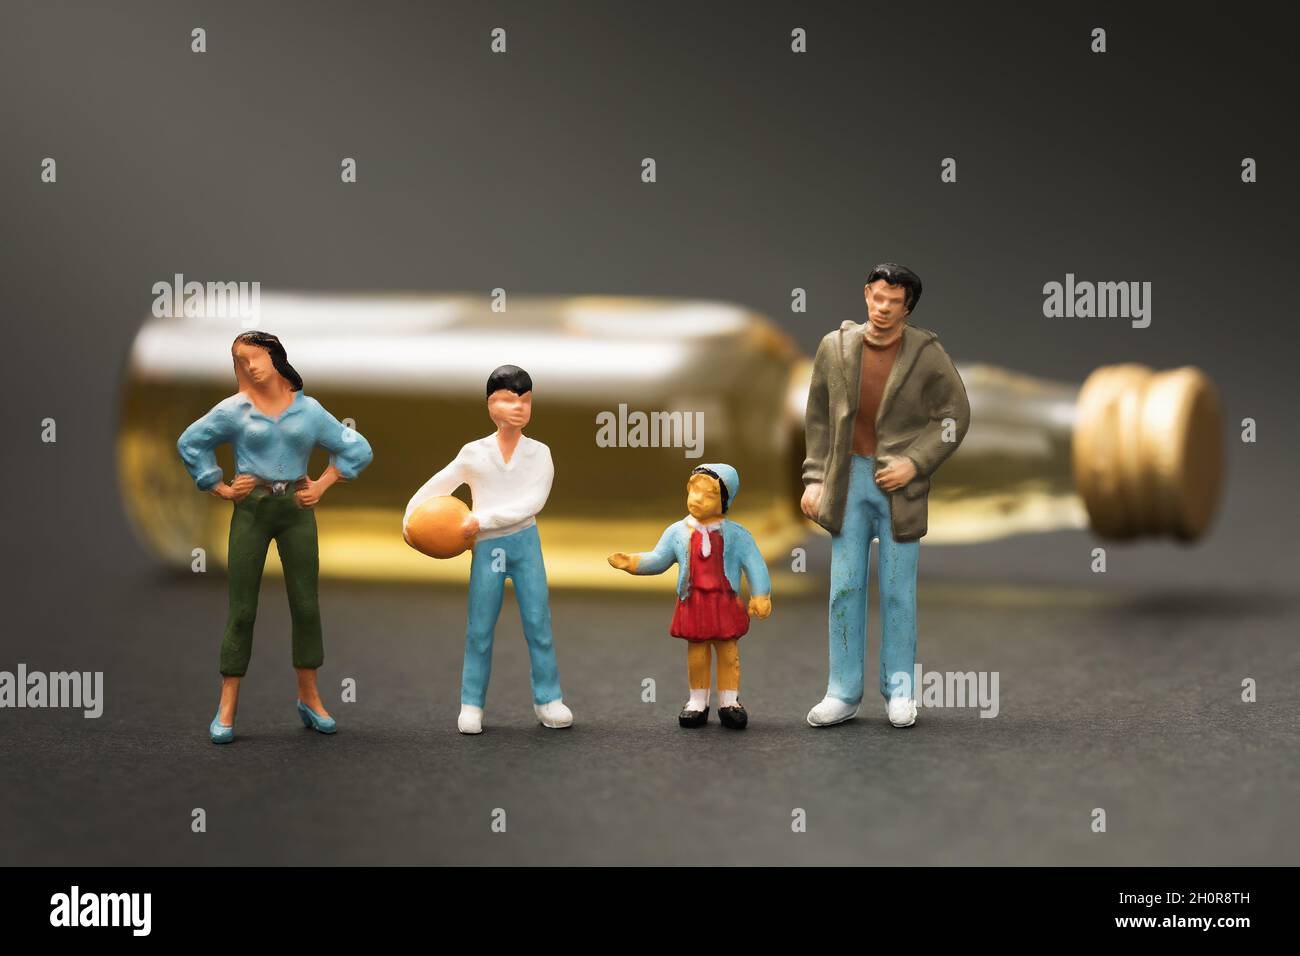 Toy men made of plastic on the background of a lying bottle of whiskey, a concept on the topic of a threat to the family due to alcohol abuse Stock Photo